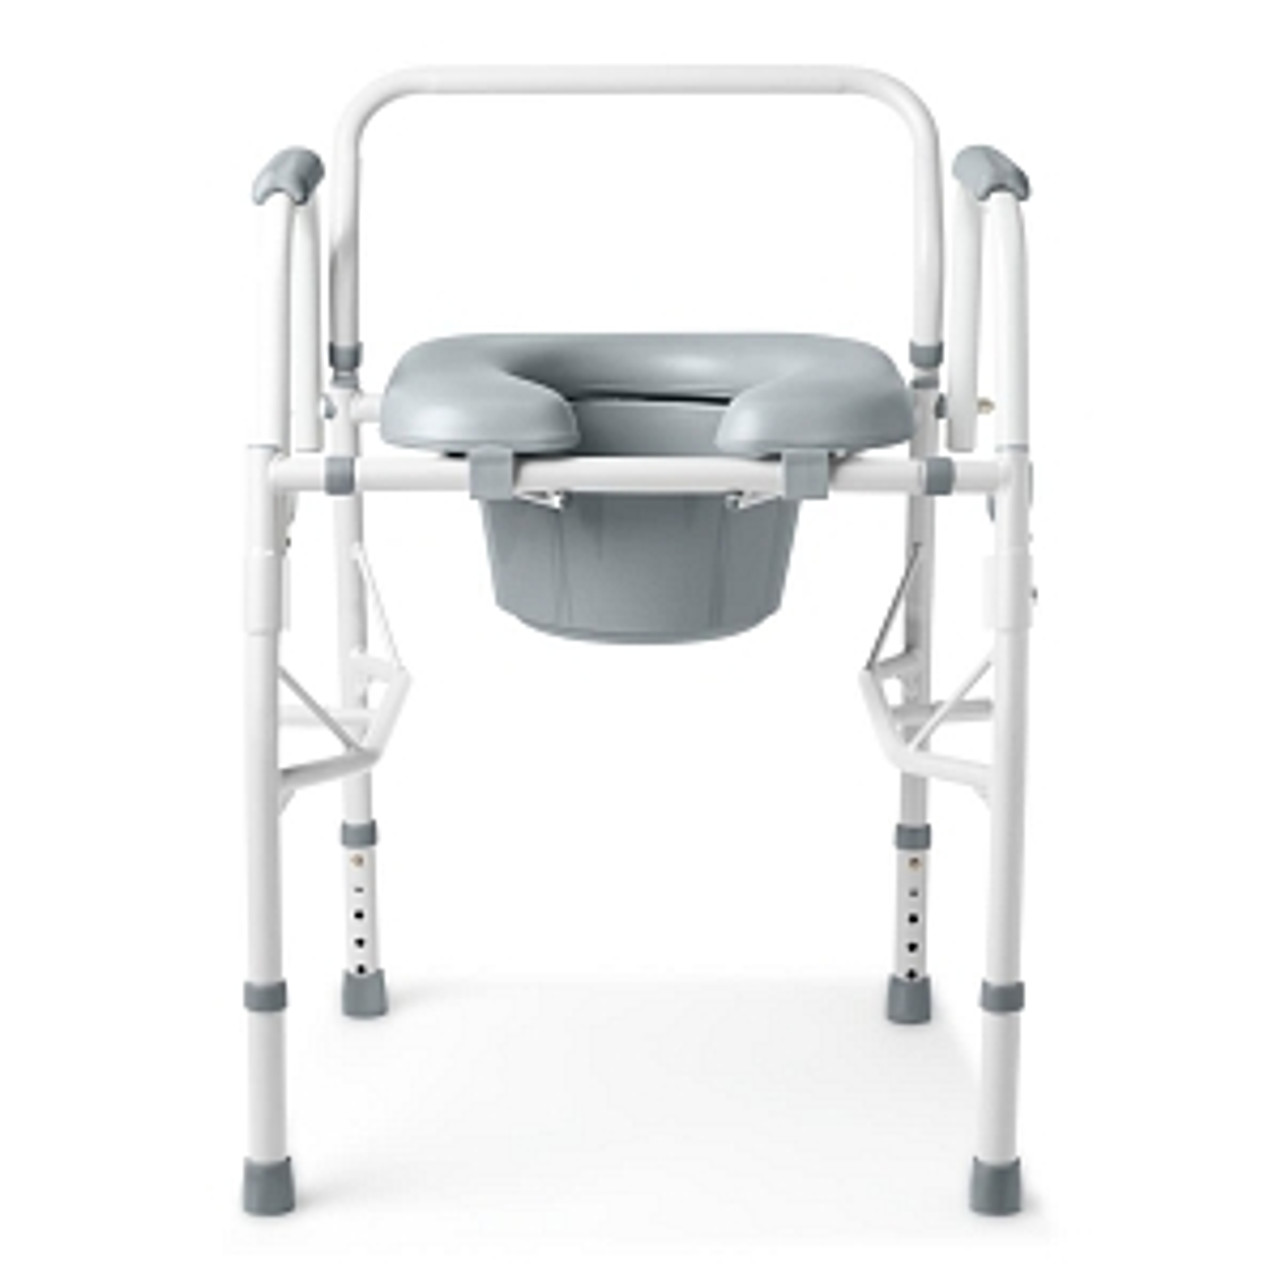 Arms drop down out of the way for easy lateral transfers on and off the commode, even for patients using wheelchairs
Place commodes near the bed with closer arm down for patients transferring during the night
Clip-on seat can be removed for easy cleaning